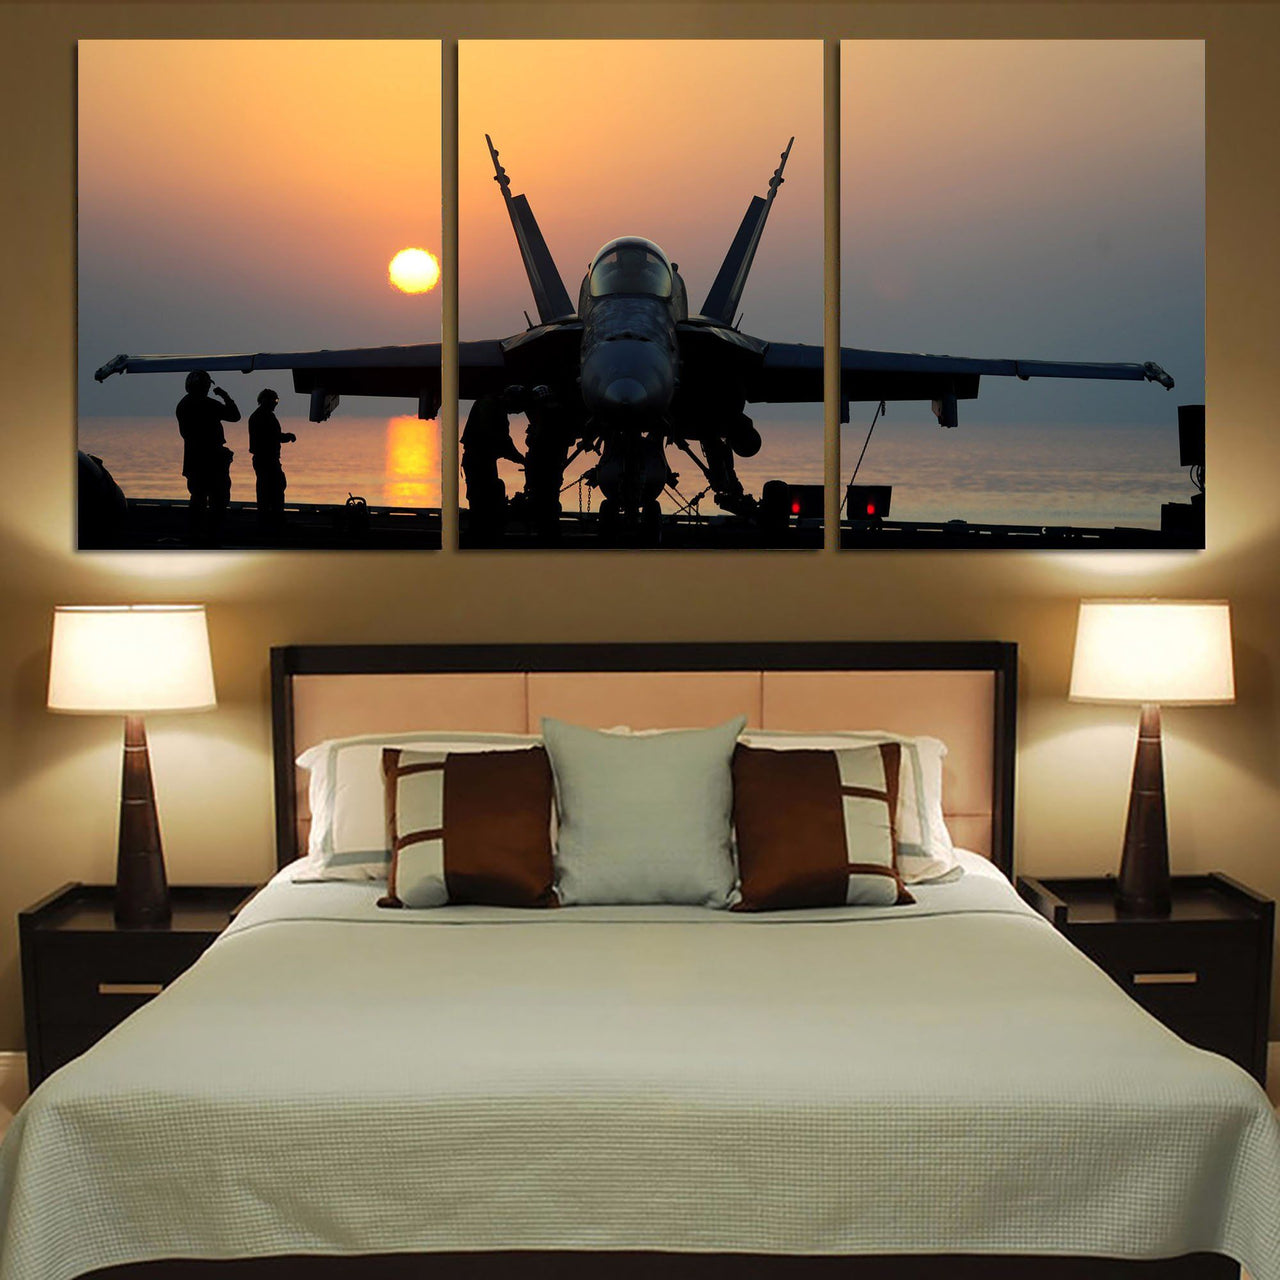 Military Jet During Sunset Printed Canvas Posters (3 Pieces) Aviation Shop 